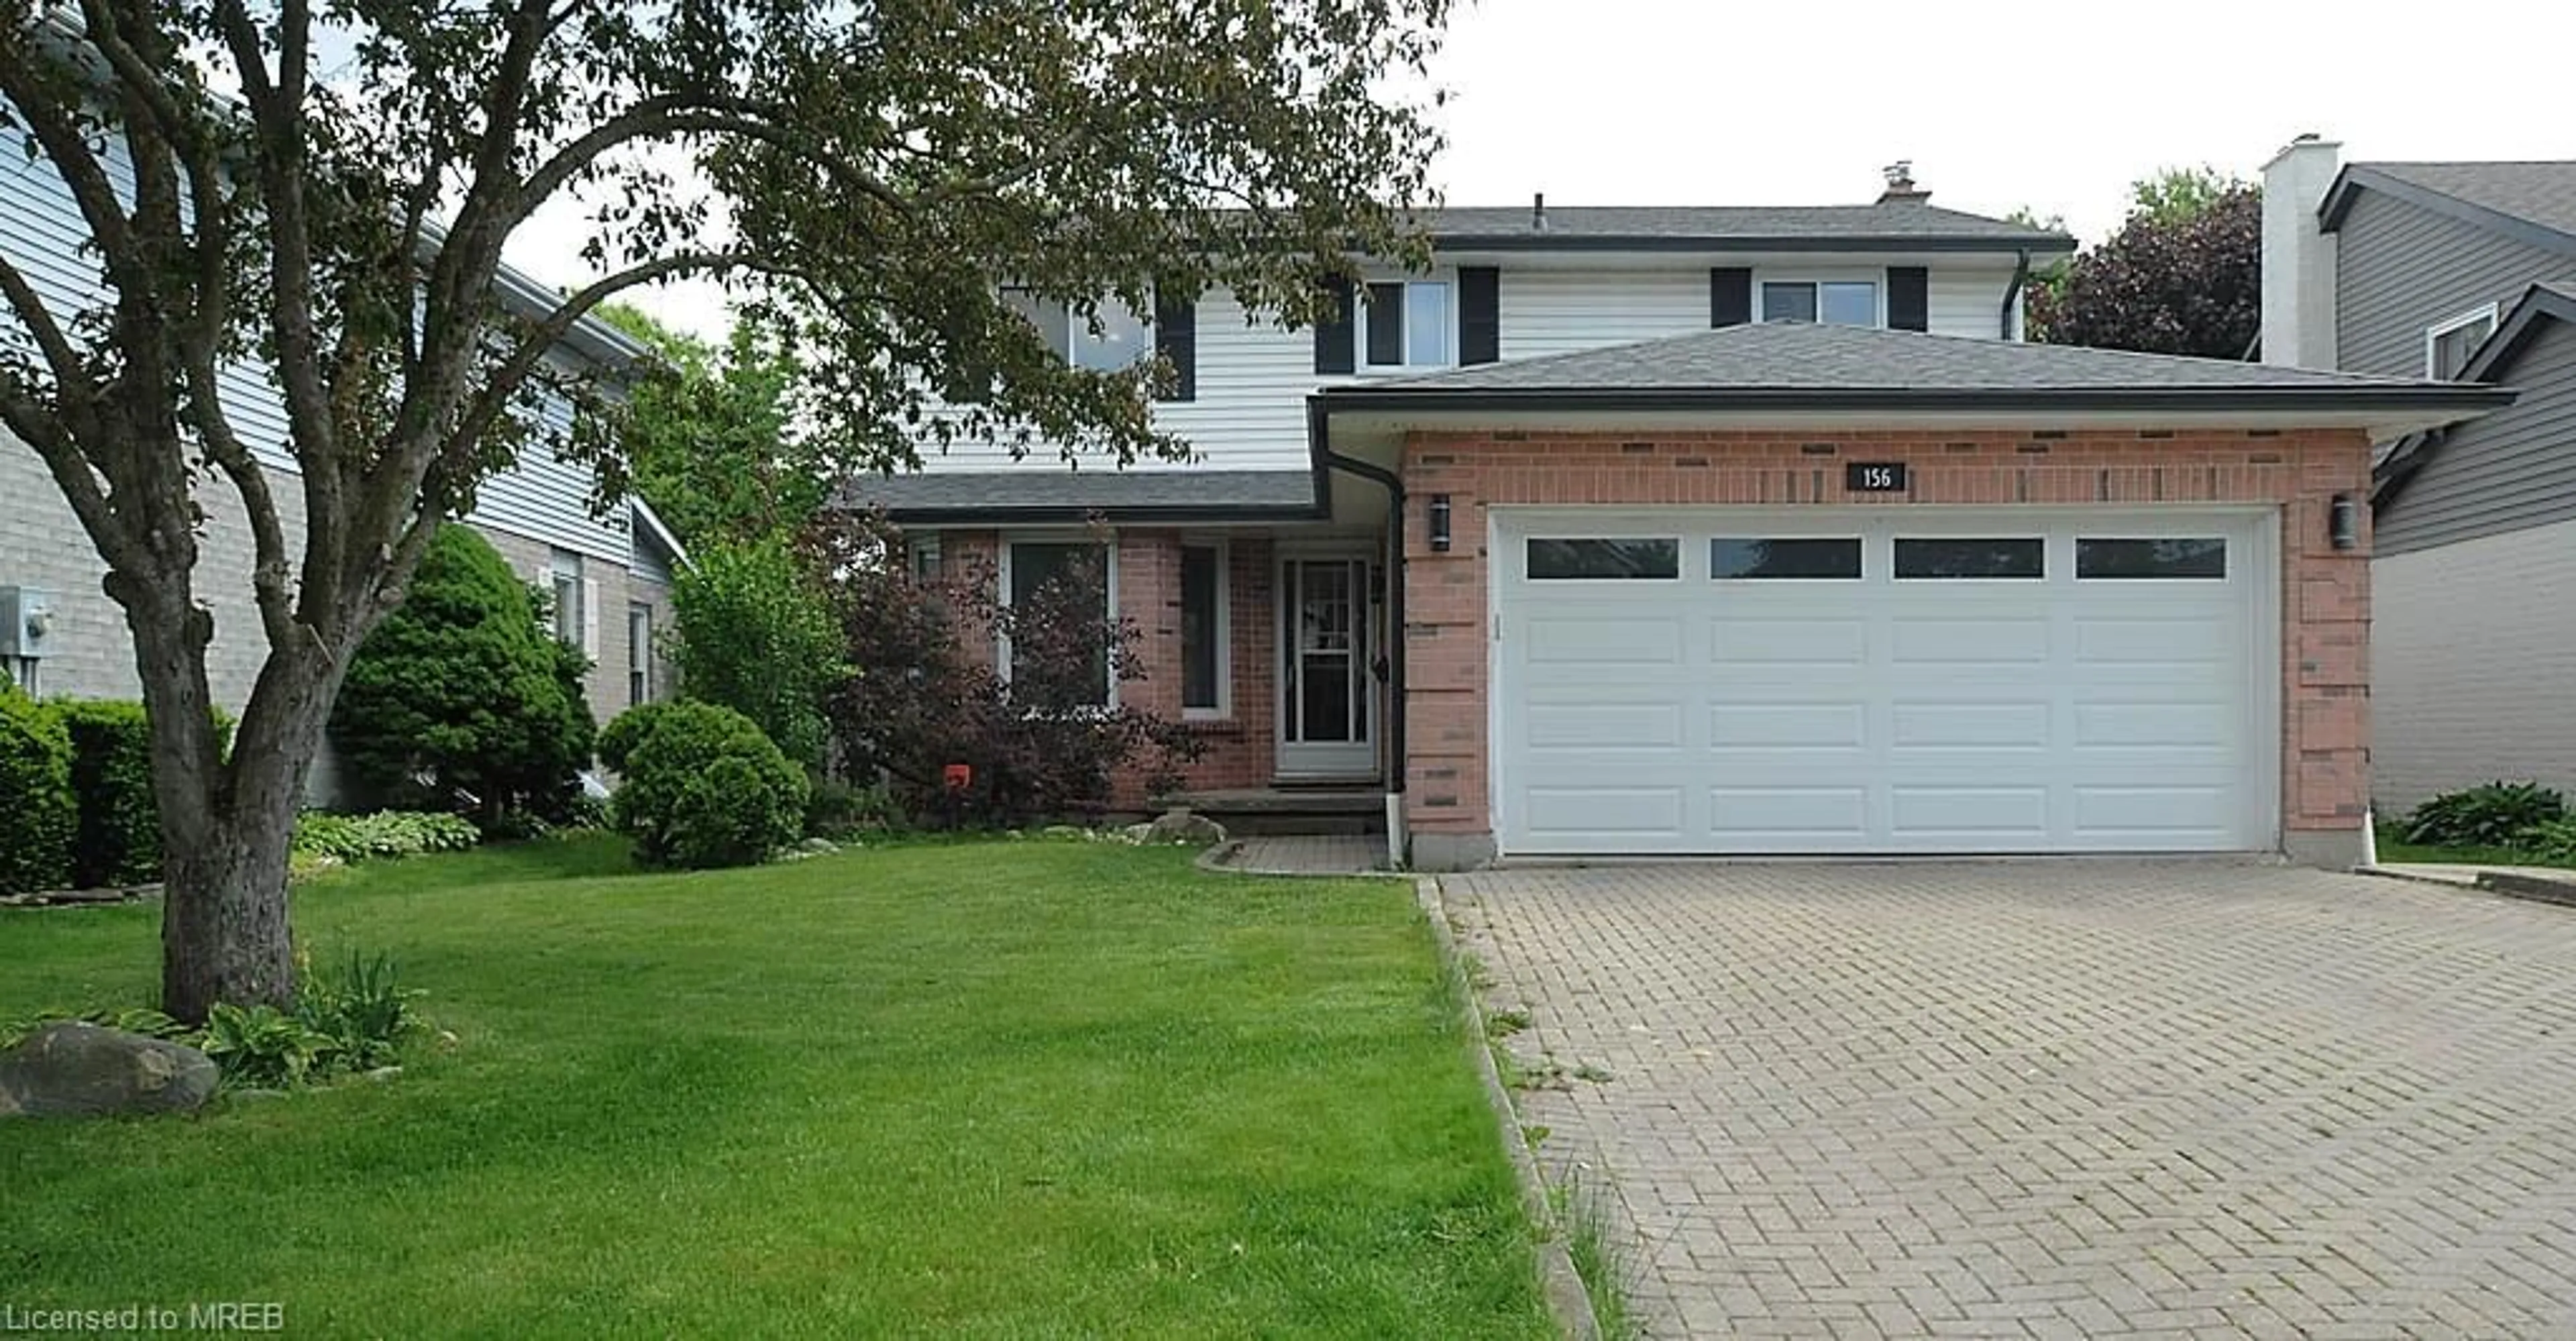 Home with brick exterior material for 156 Bexhill Close, London Ontario N6E 3B1